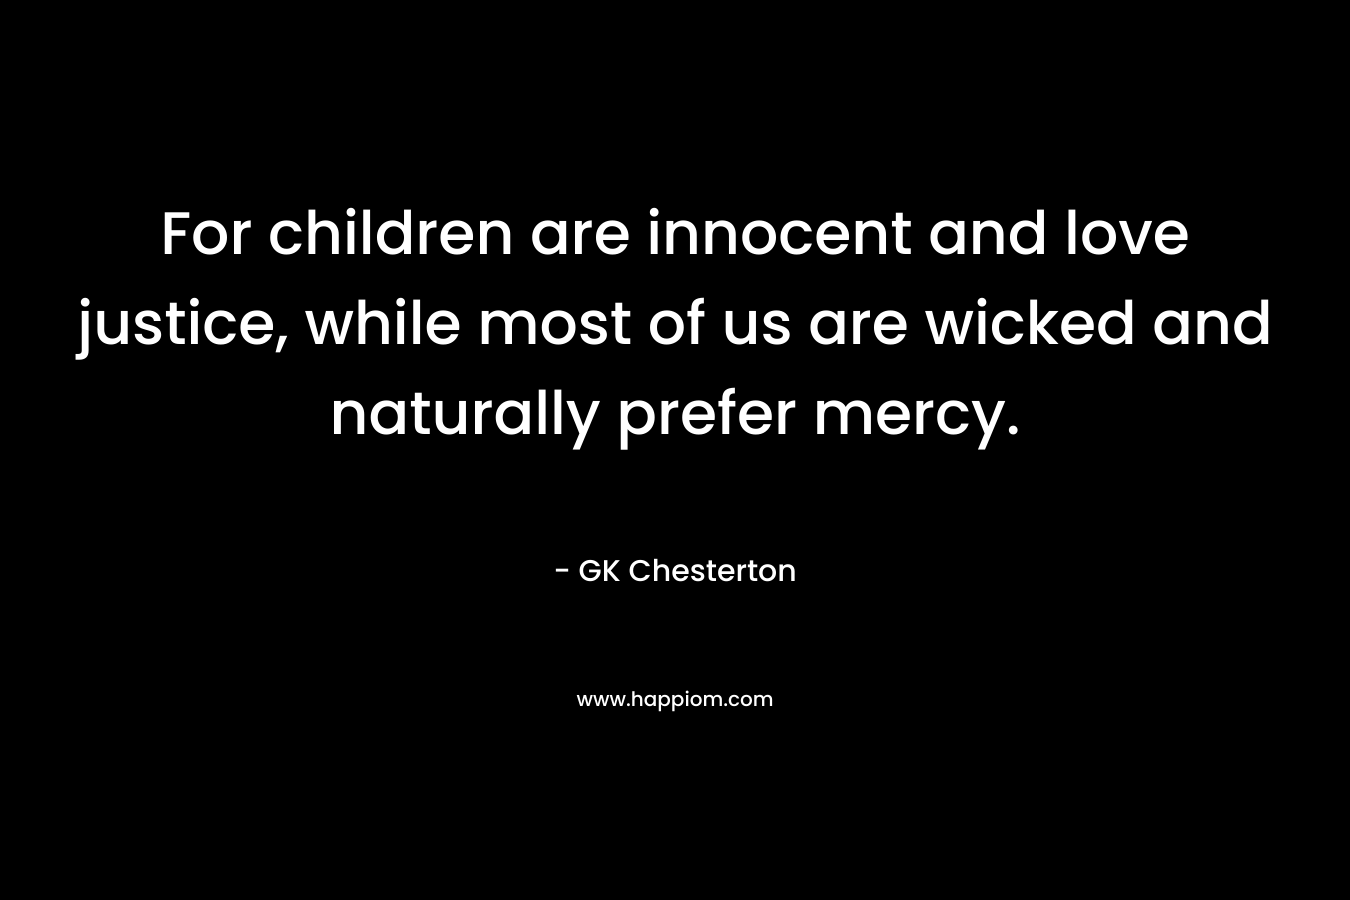 For children are innocent and love justice, while most of us are wicked and naturally prefer mercy. – GK Chesterton